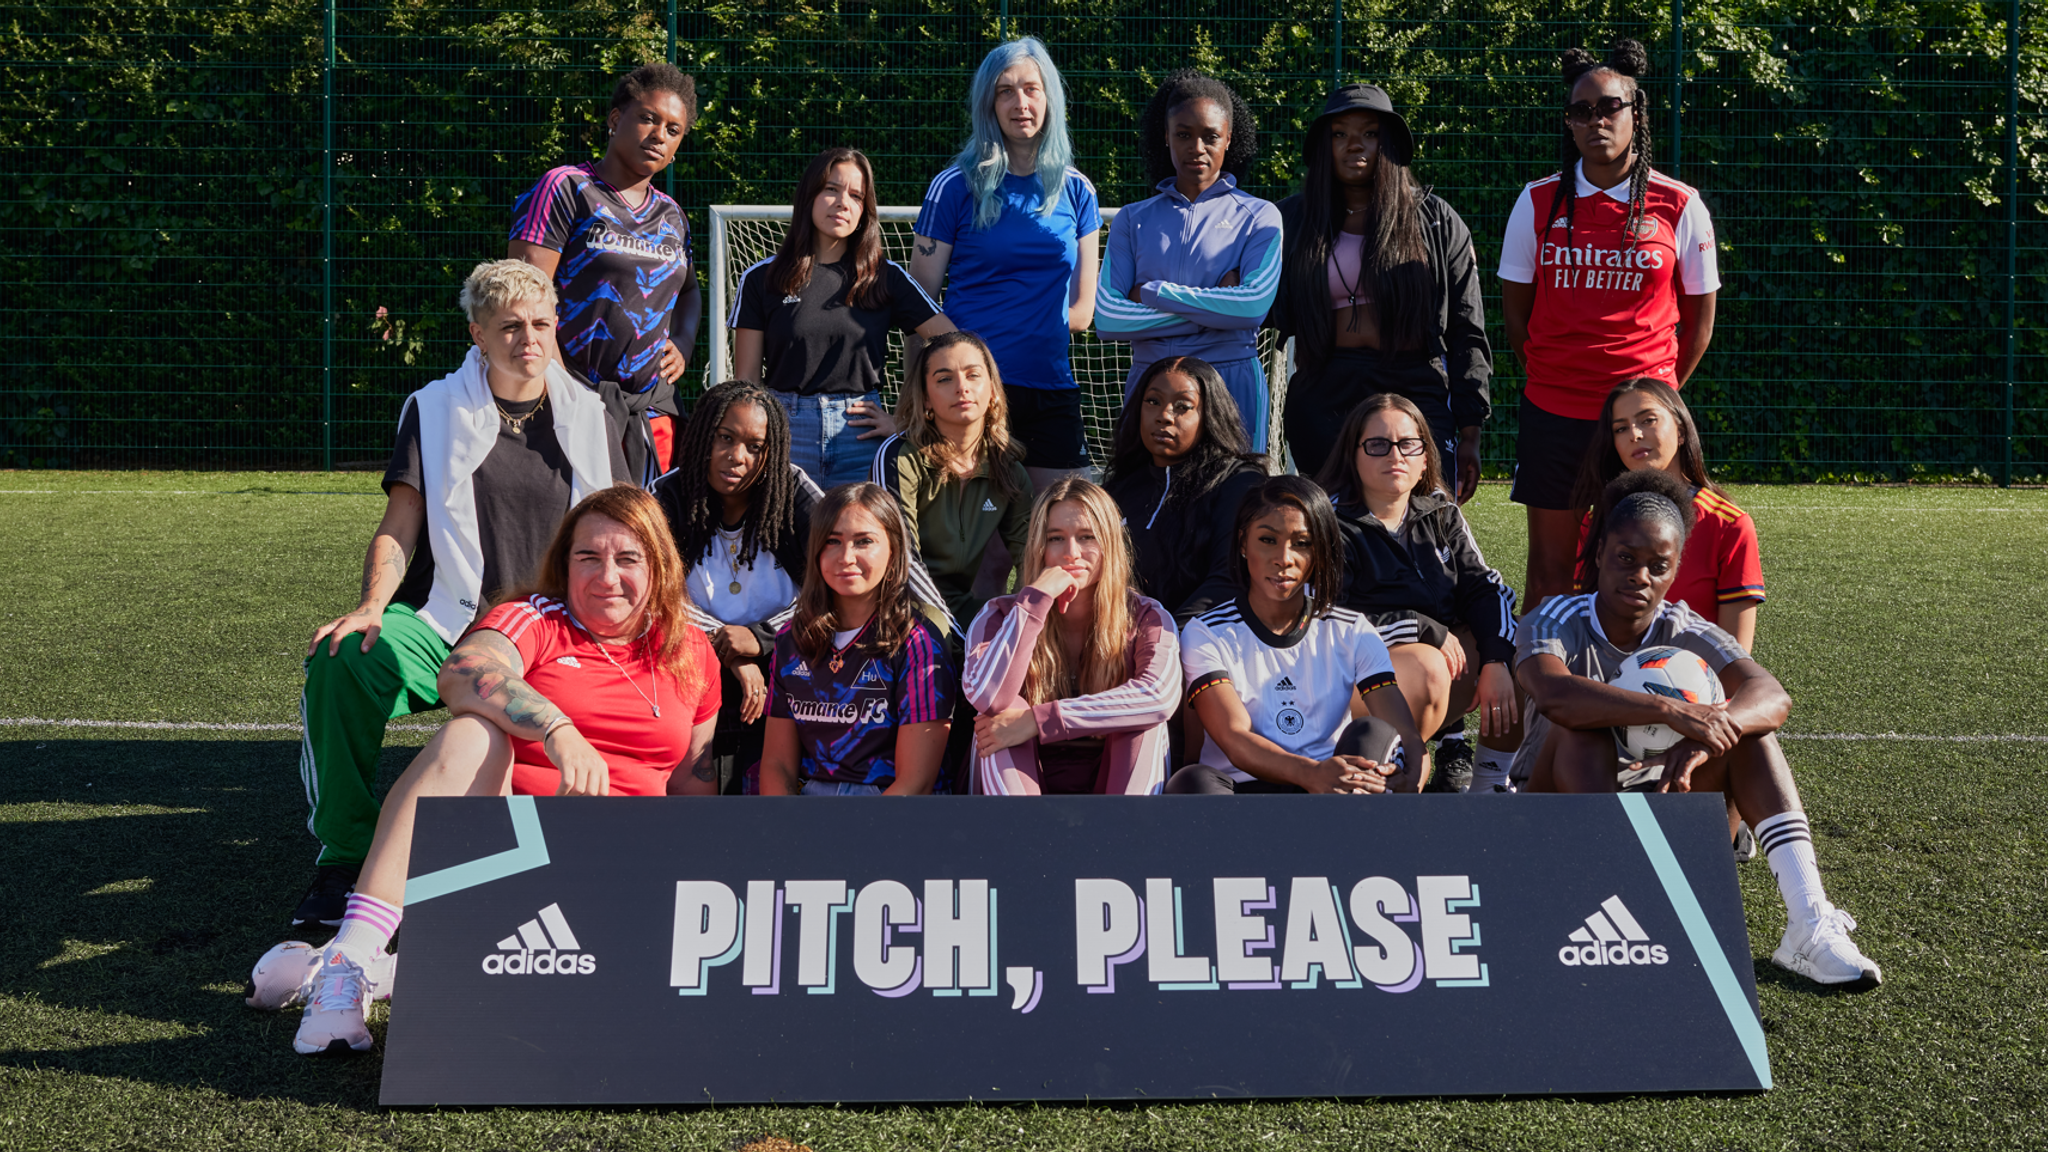 schipper pellet tarief Women's Euros: Adidas to provide dedicated pitches for women, girls and  non-binary players during tournament | Football News | Sky Sports